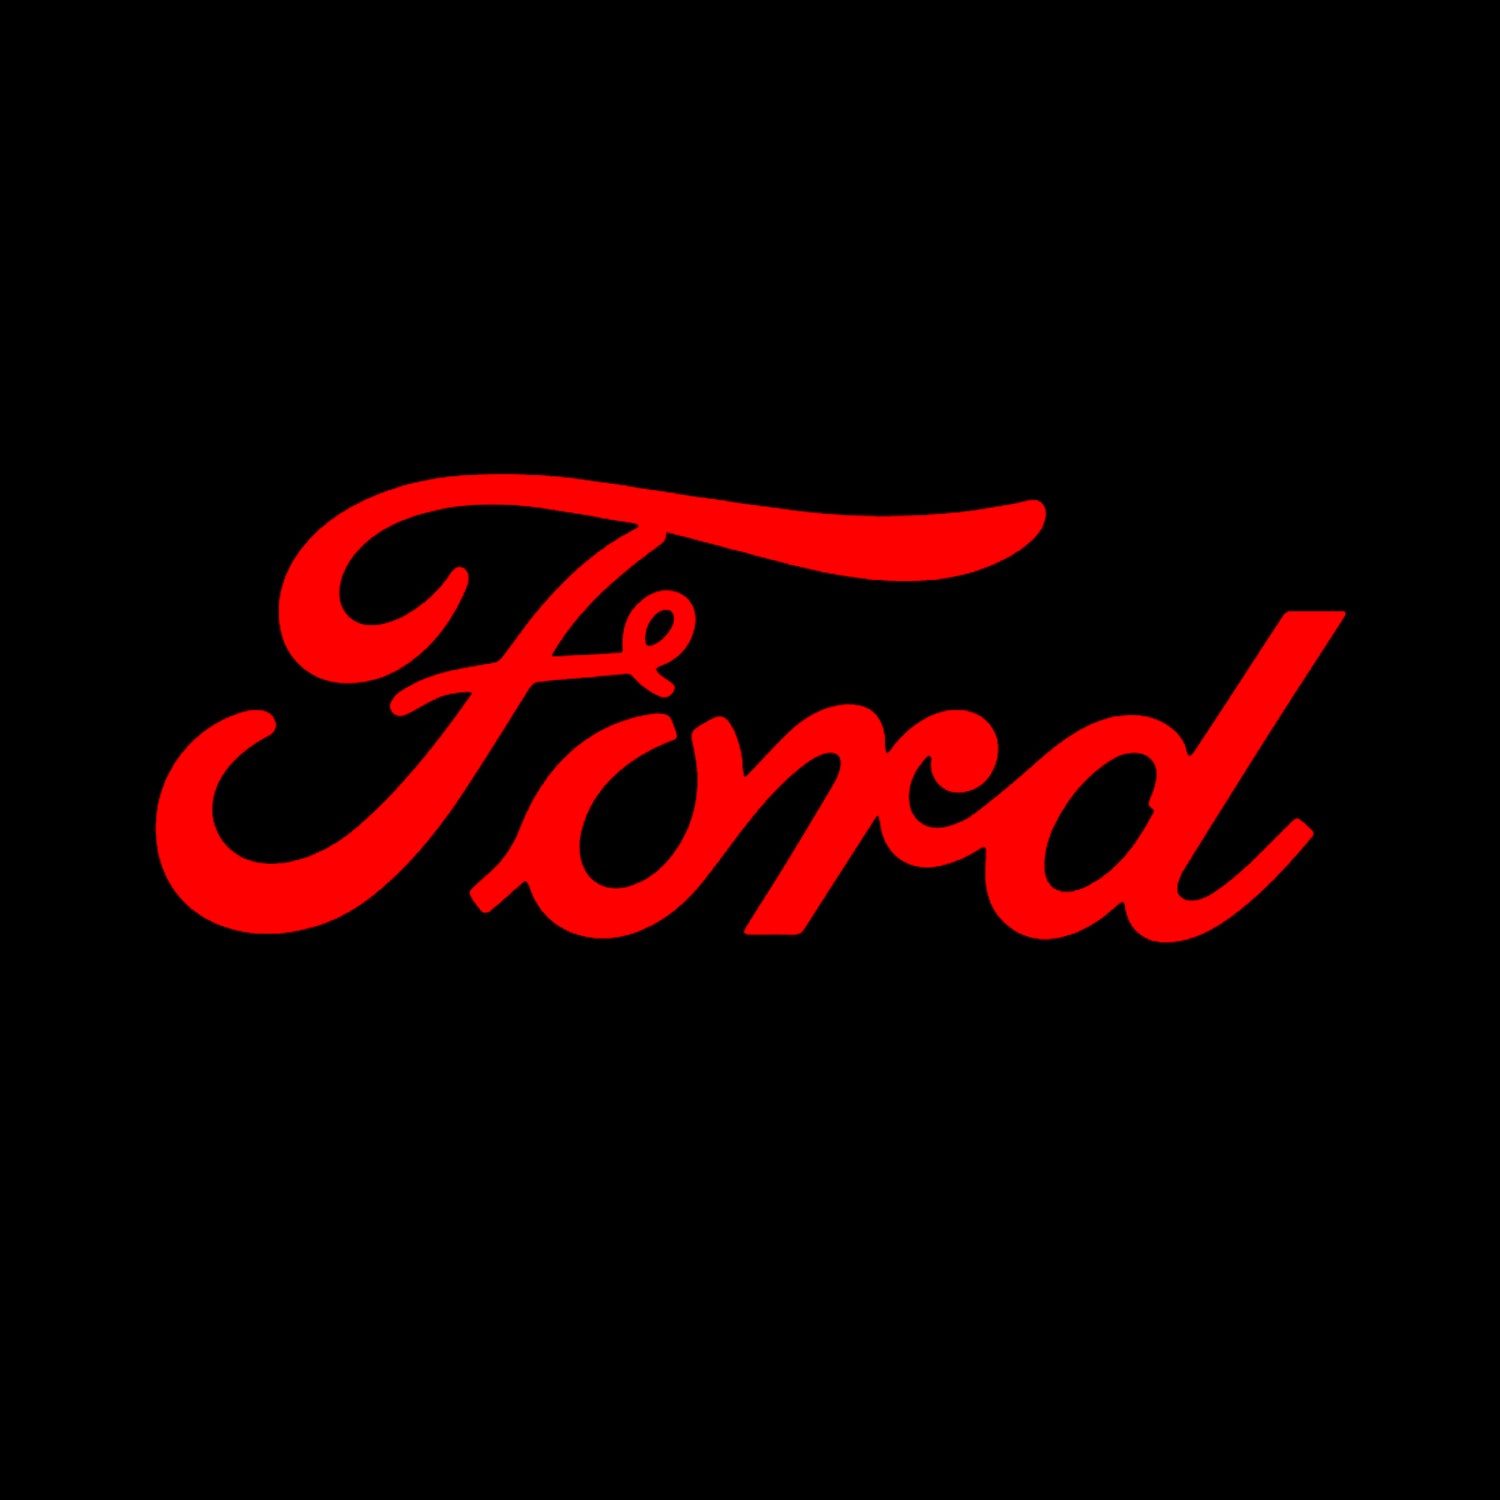 Ford Logo in red with black background